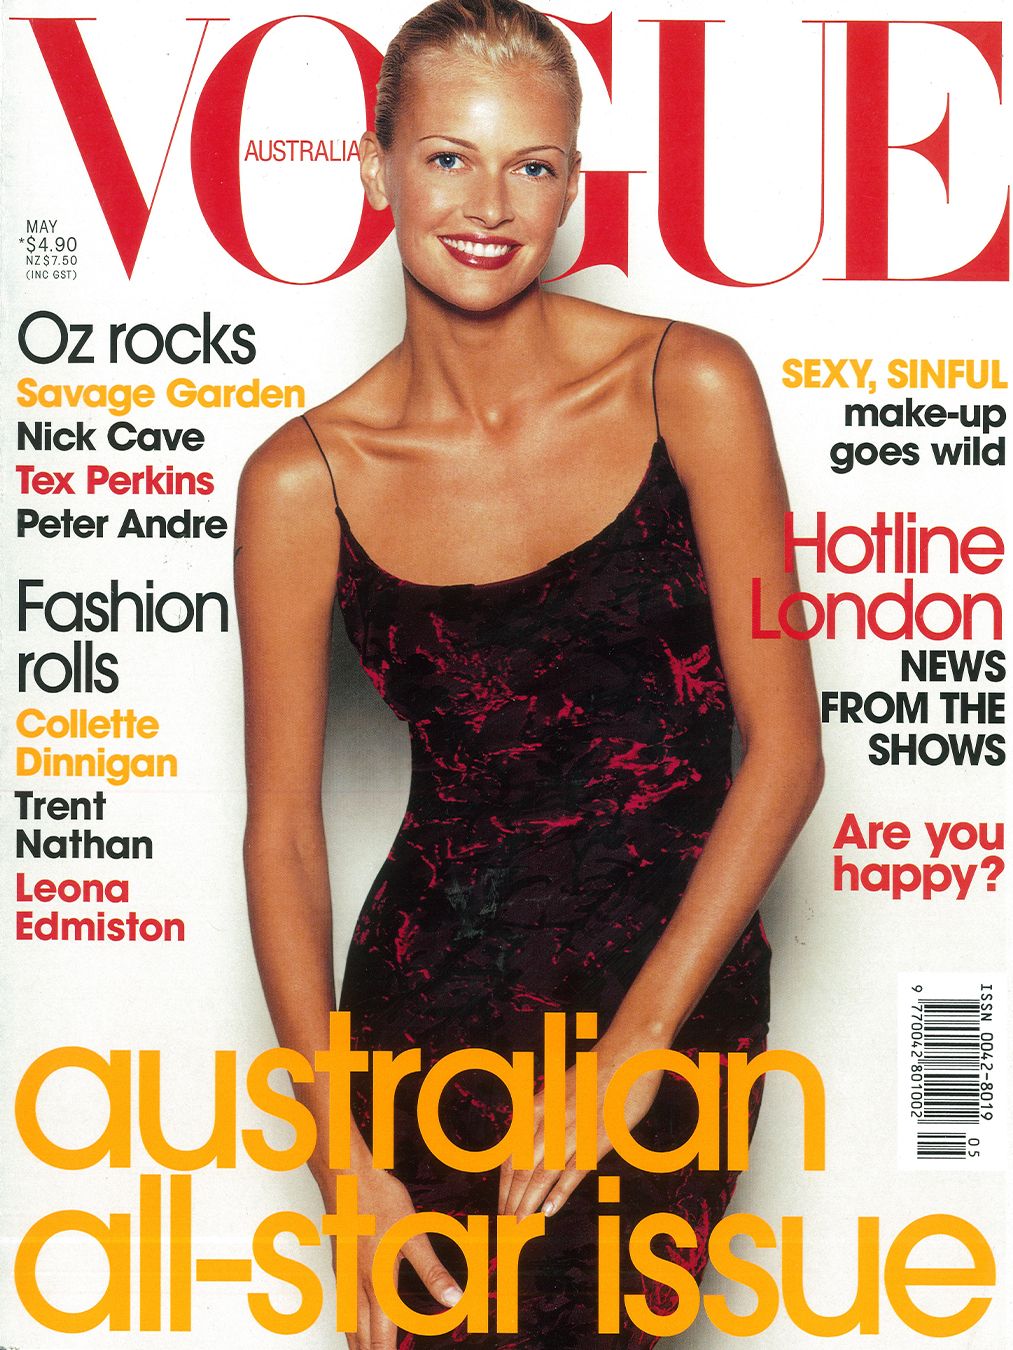 Vogue Australia magazine cover with Sarah Murdoch smiling with a sleek bun wearing a black and red slip dress